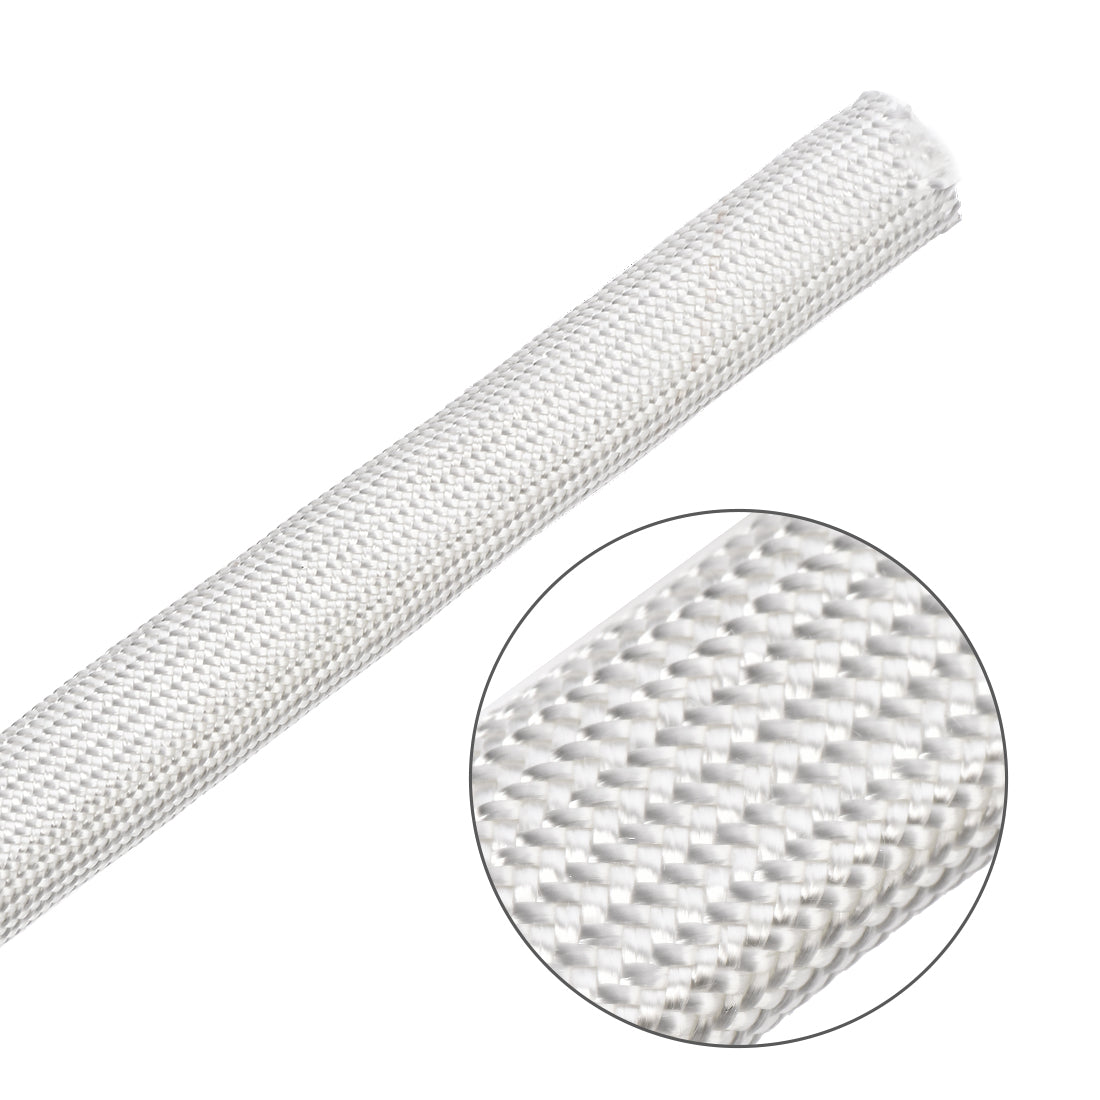 uxcell Uxcell Insulation Cable Protector, 3.3Ft-14mm High TEMP Fiberglass Sleeve White